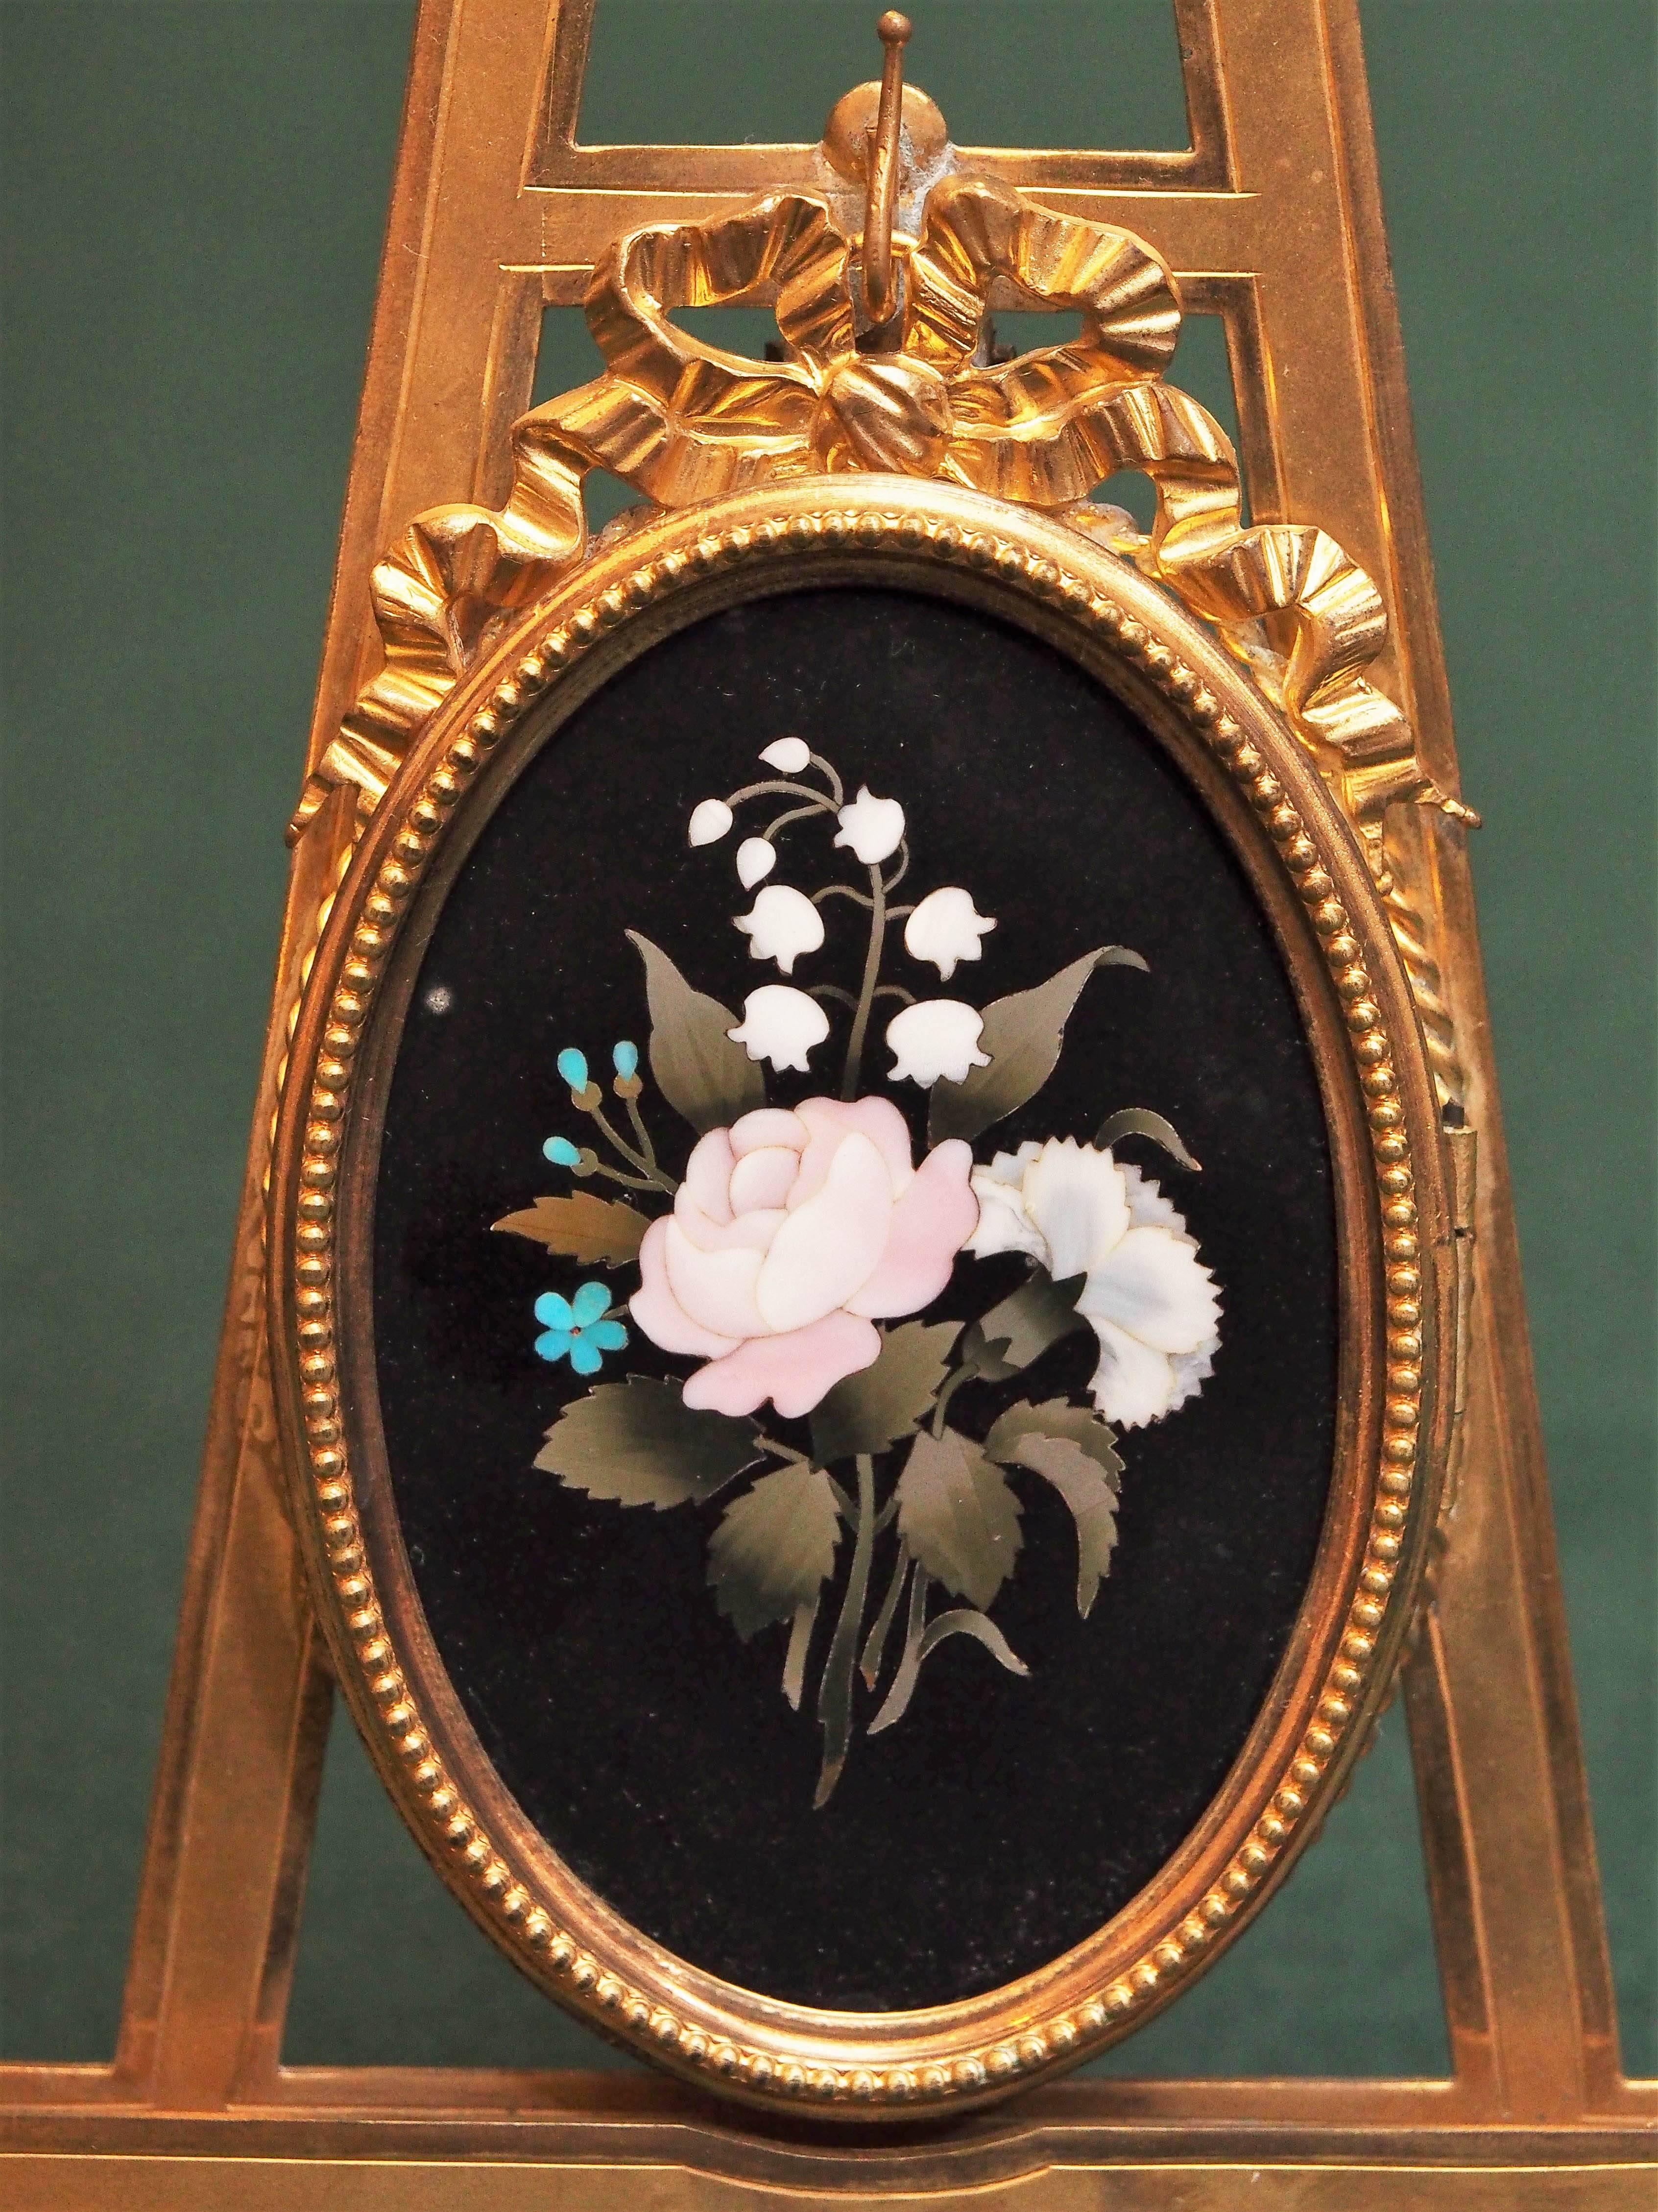 Italian Pietra Dura plaque with gilt bronze frame on gilt bronze easel.
The oval plaque is surrounded by a Napoleon III style oval bow mounted frame that opens to reveal a space for a photograph. Easel back allows freestanding.
   